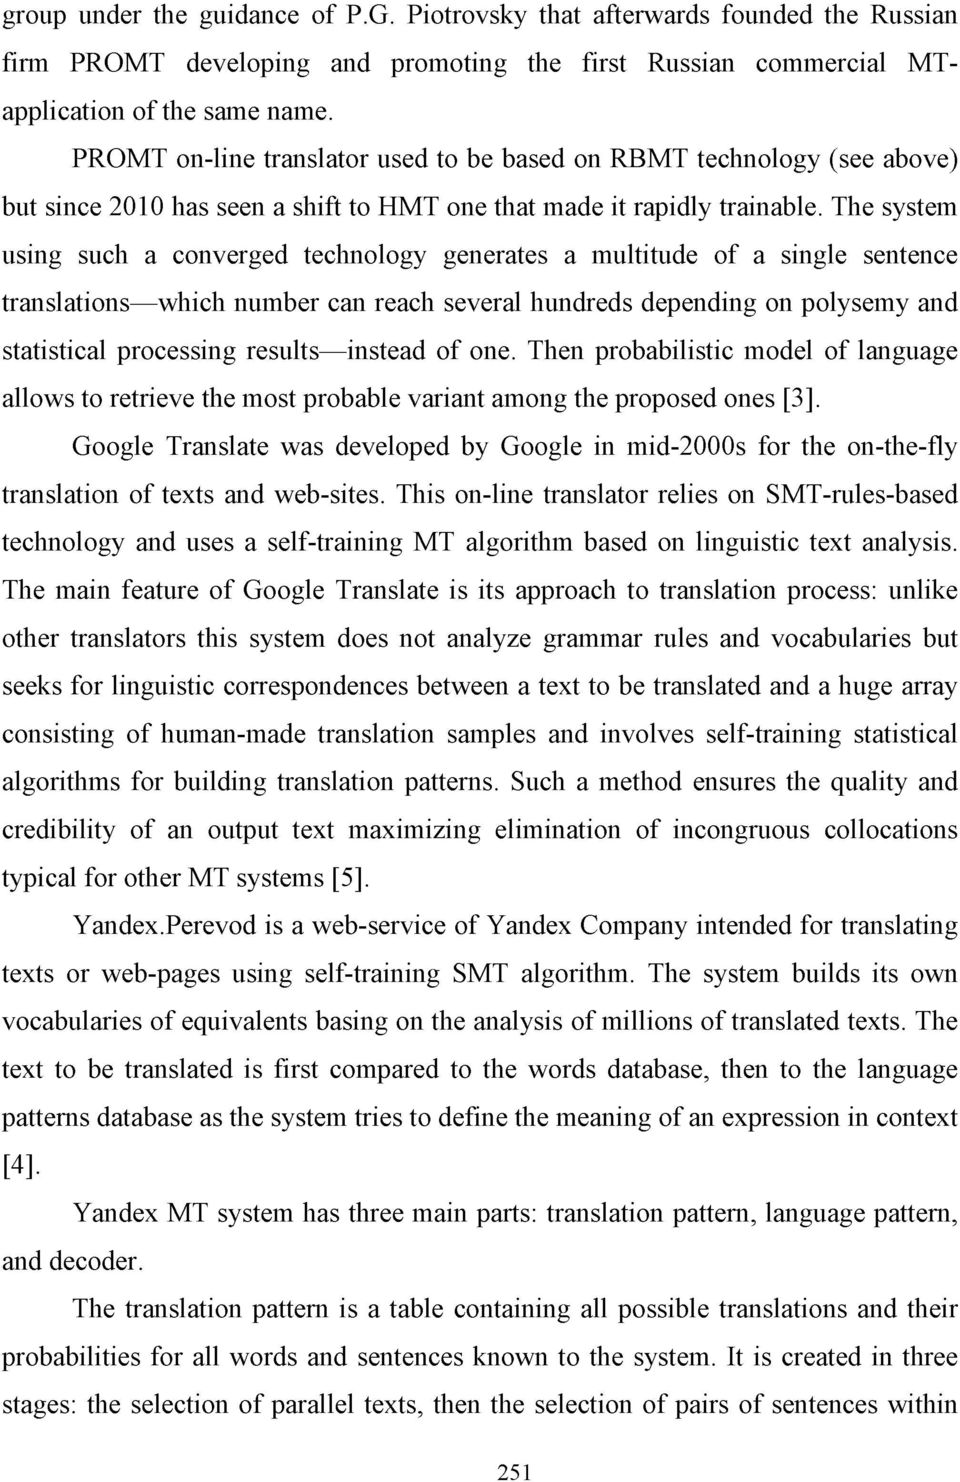 The system using such a converged technology generates a multitude of a single sentence translations which number can reach several hundreds depending on polysemy and statistical processing results